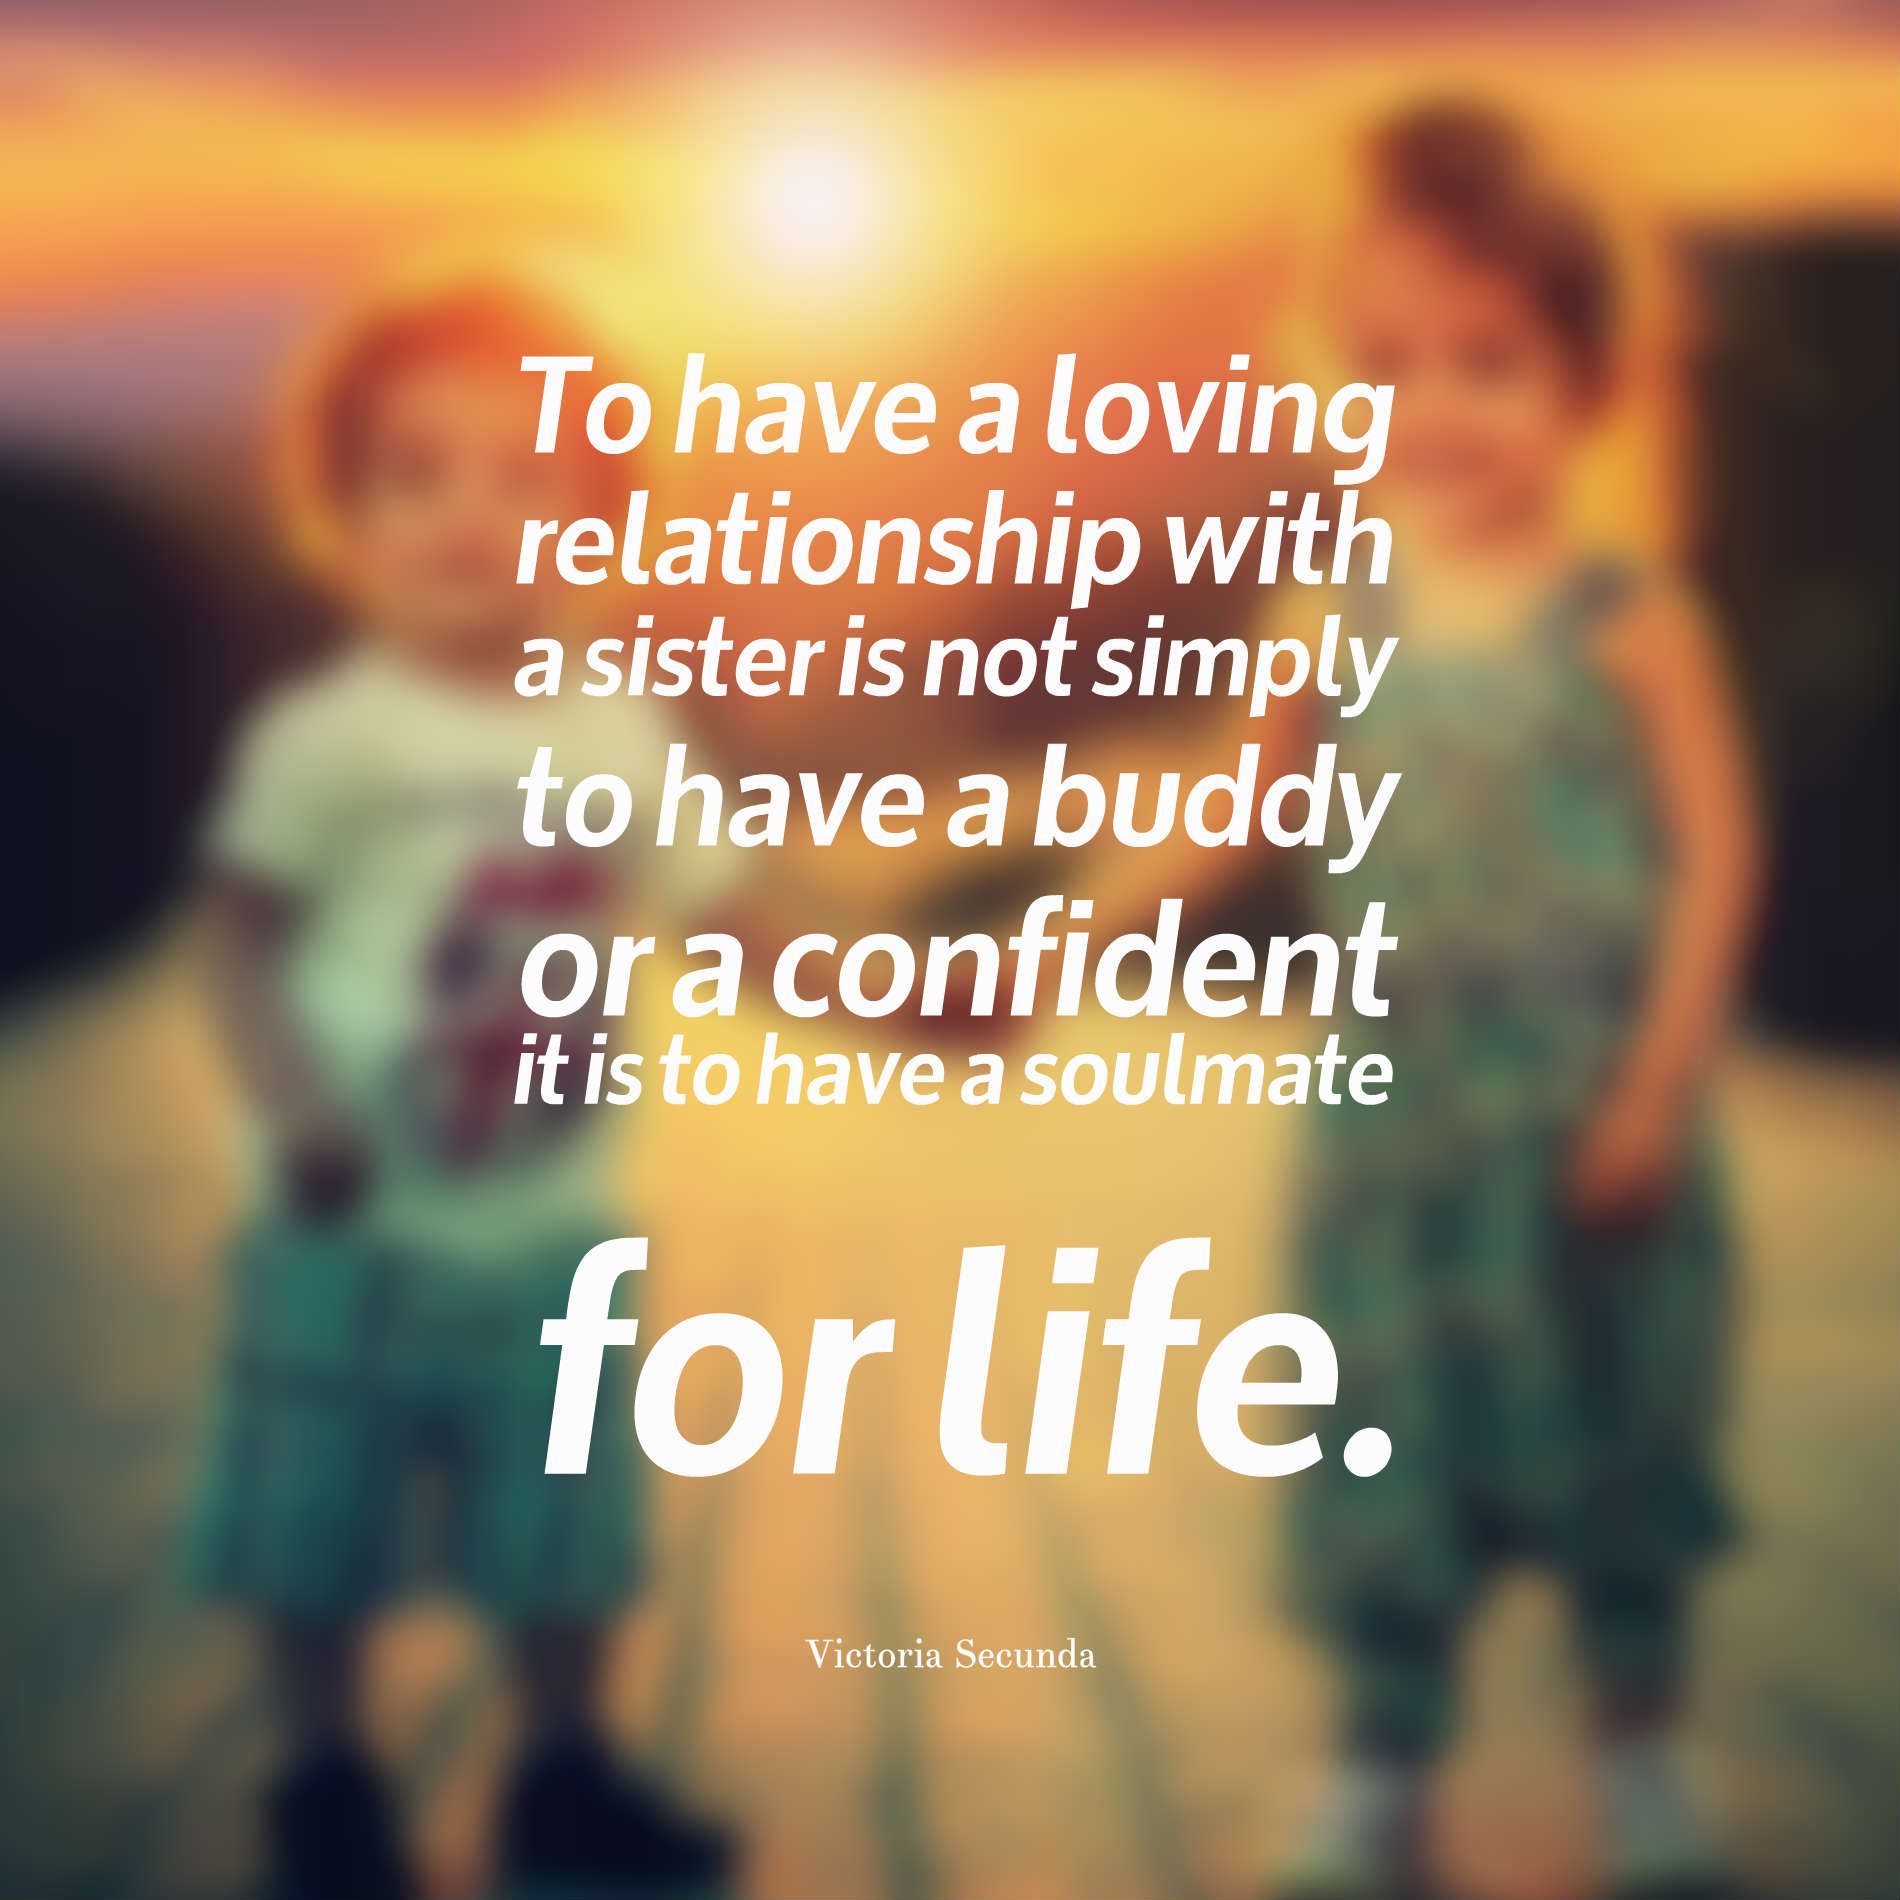 To have a loving relationship with a sister is not simply to have a buddy or a confident -- it is to have a soulmate for life.